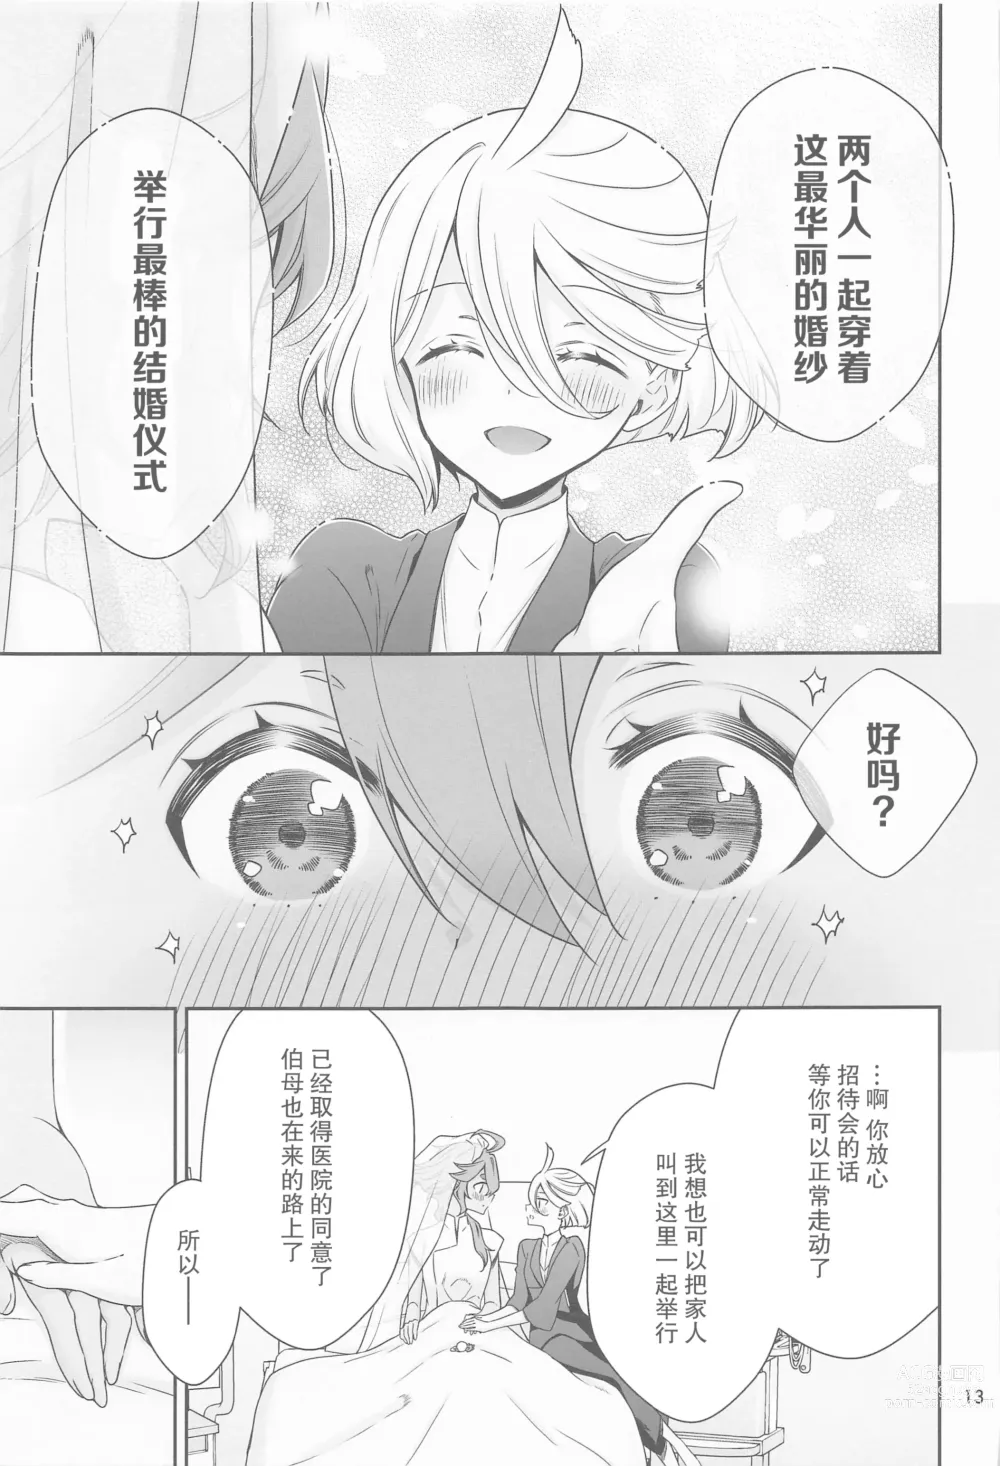 Page 13 of doujinshi 祝福之日